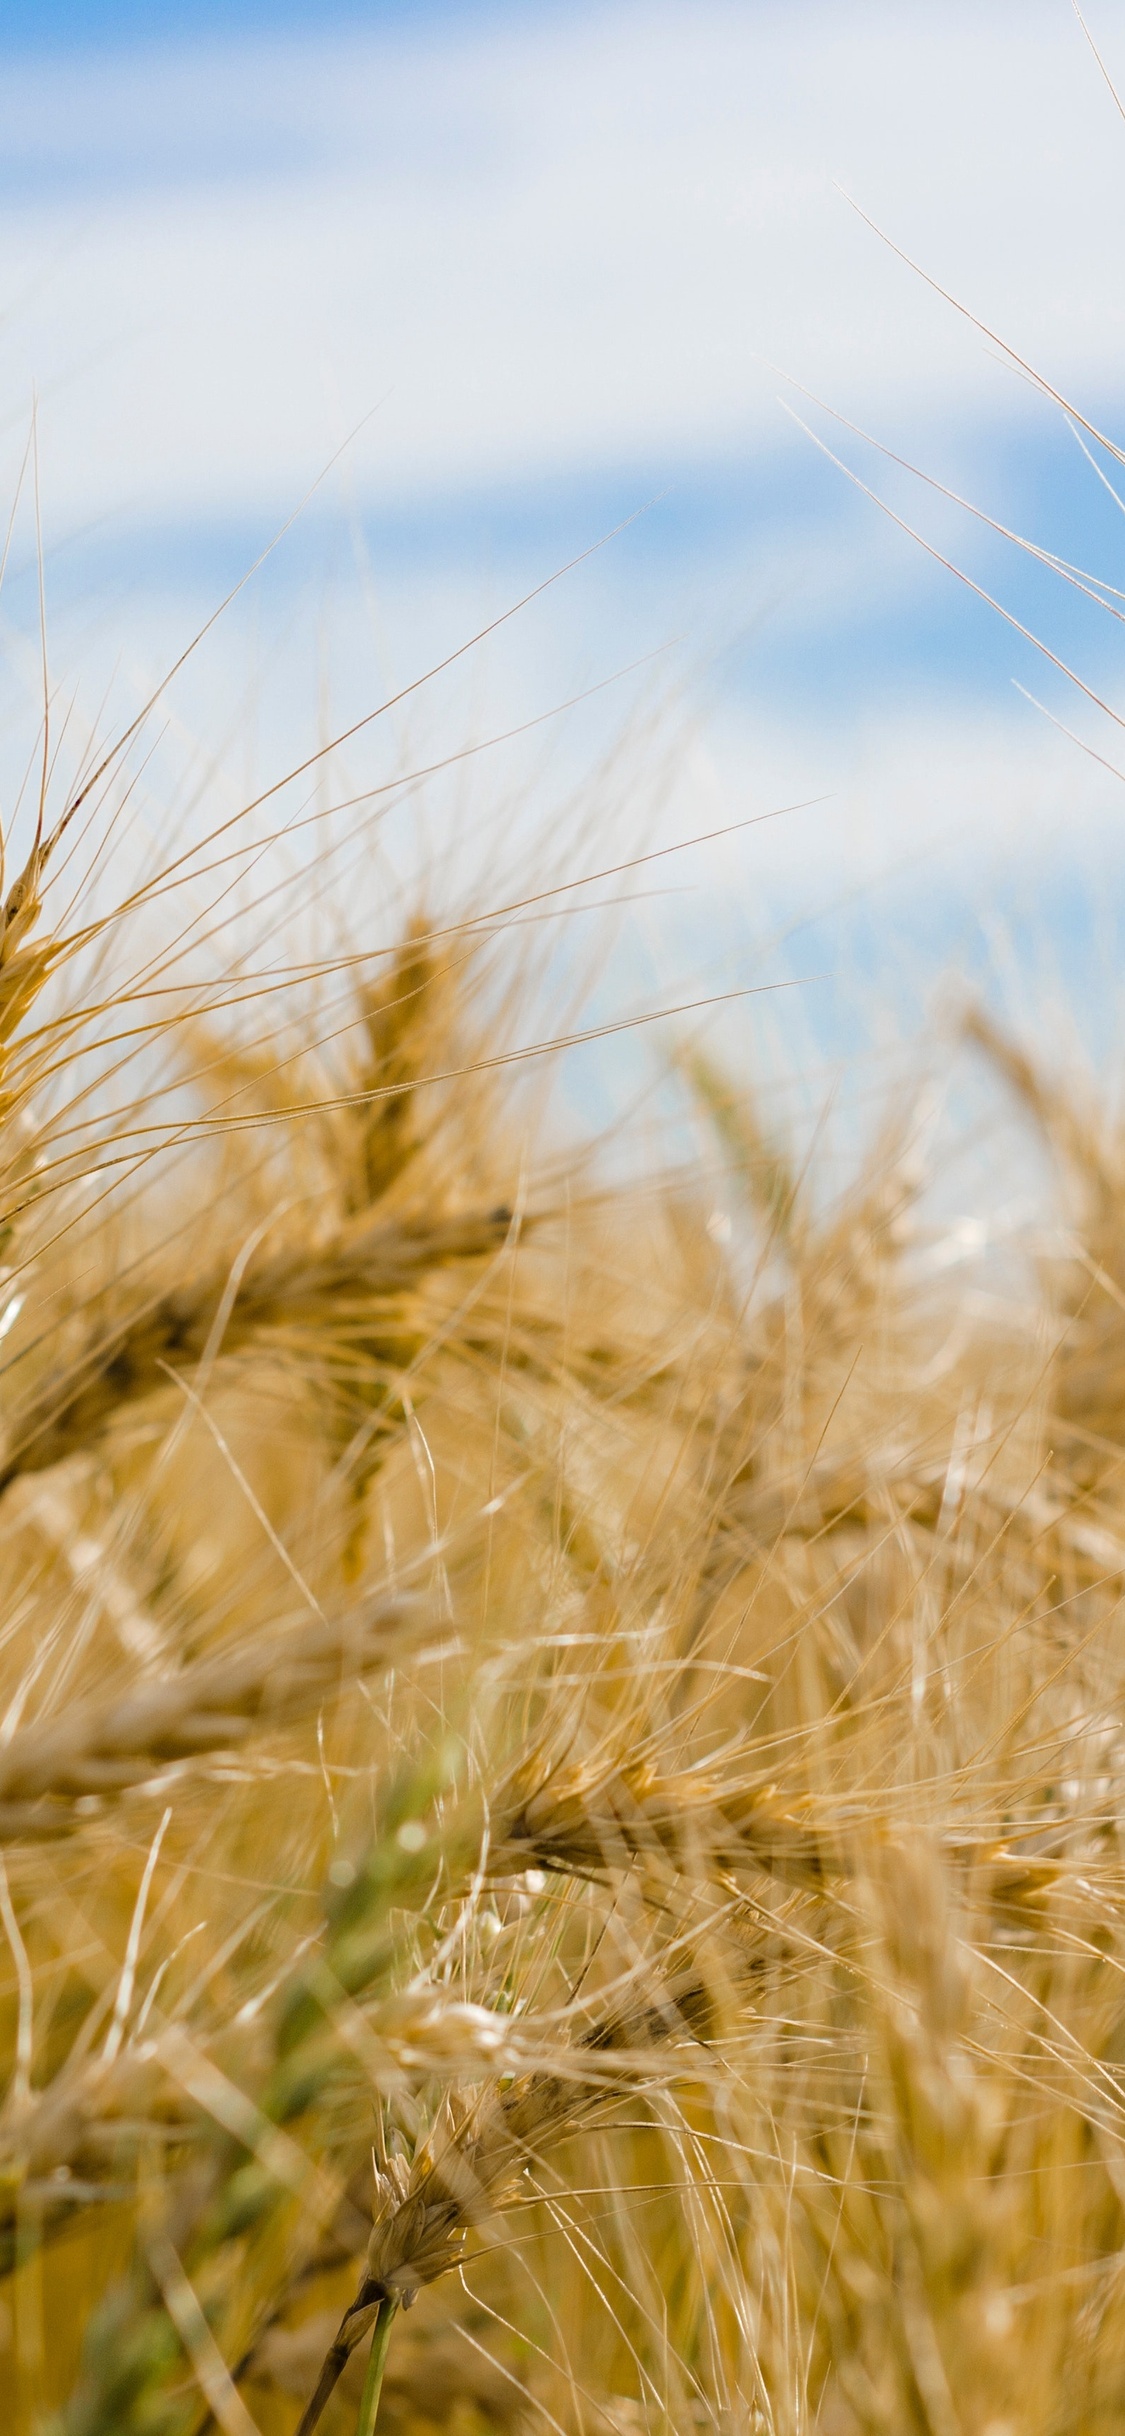 A close up of some wheat in the field - Farm